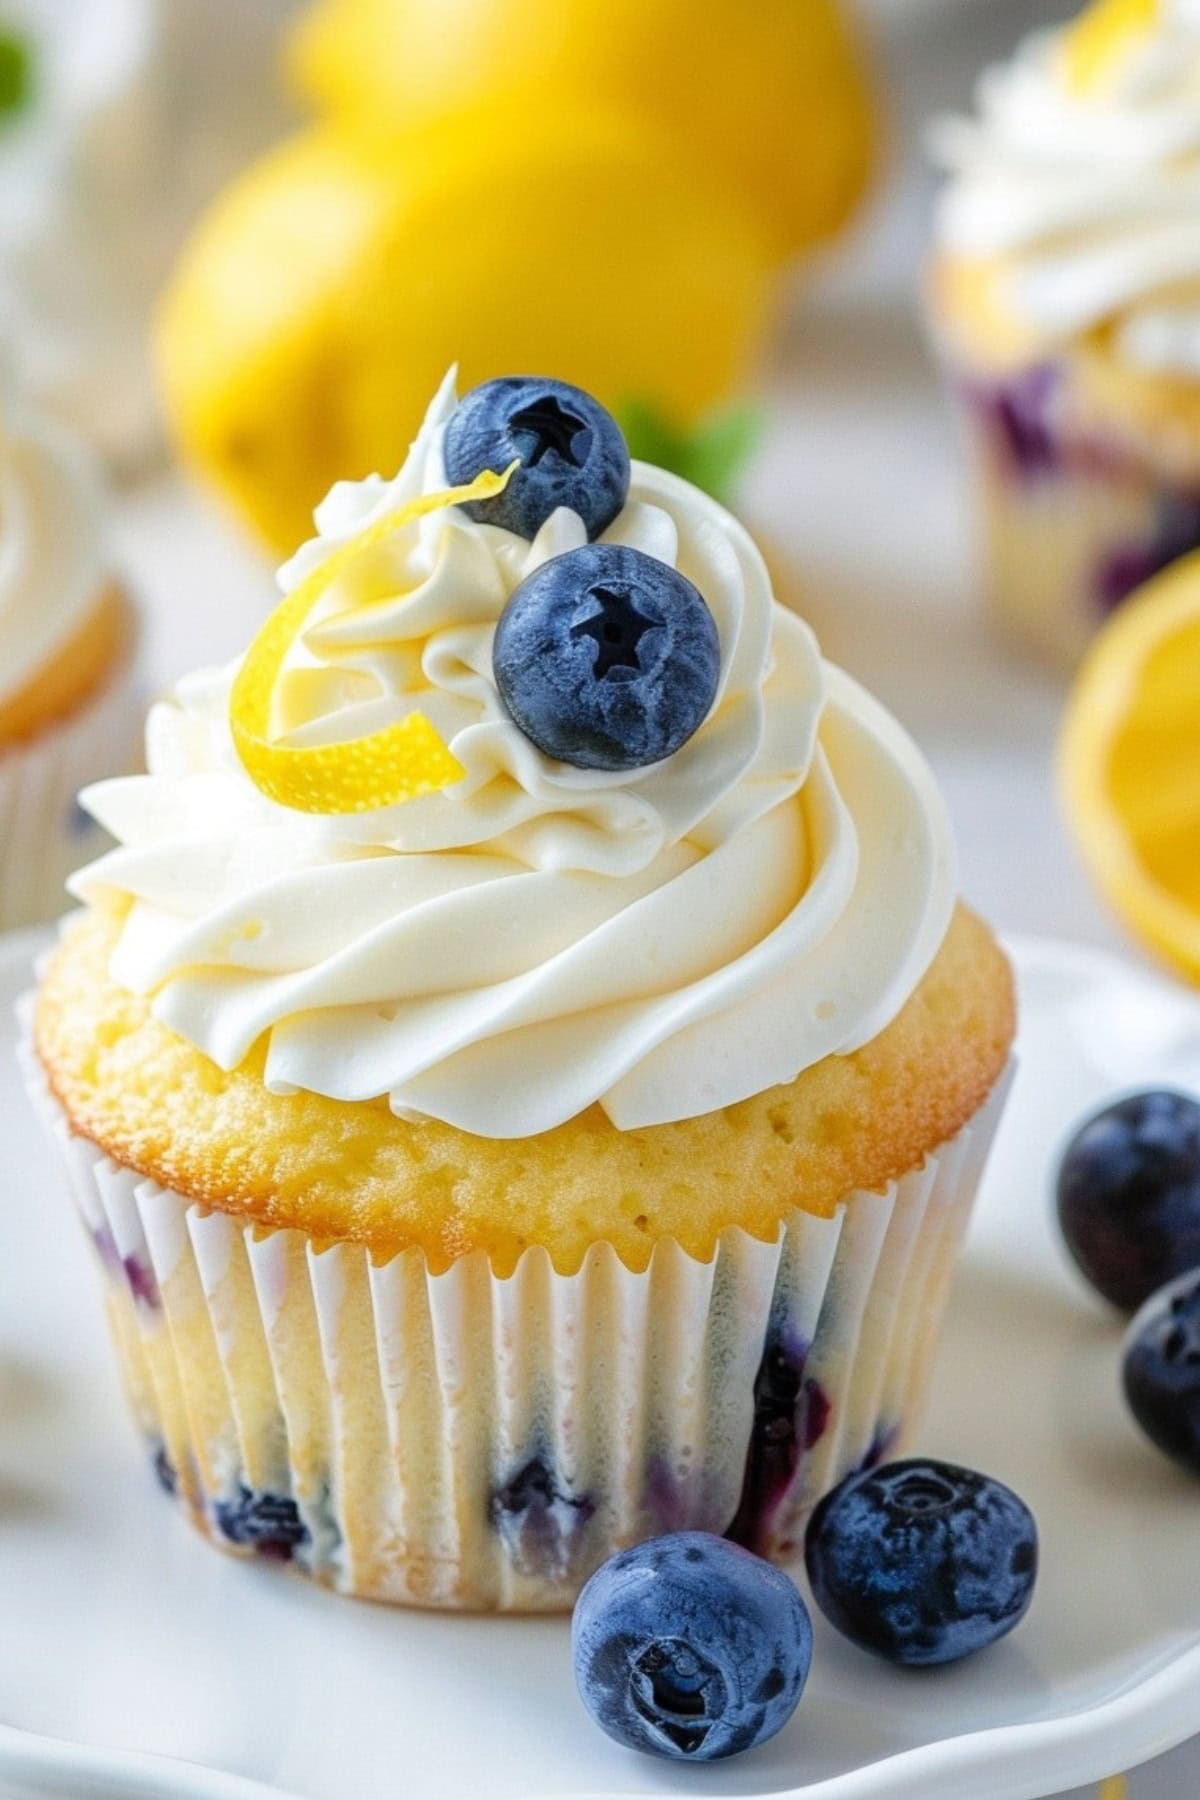 Cupcake with blueberries garnished with buttercream frosting.